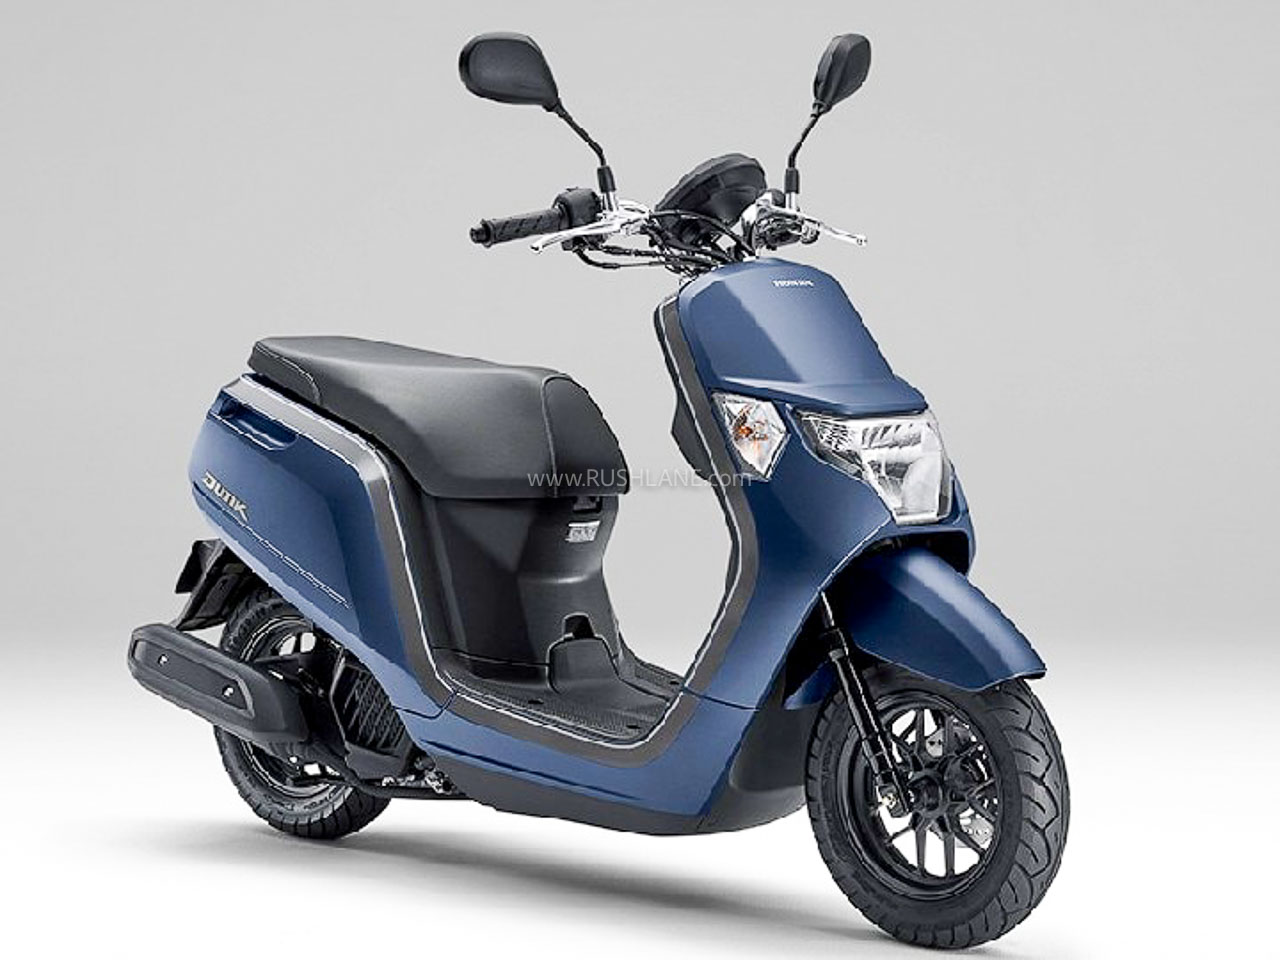 New Honda 50cc Scooters Debut With